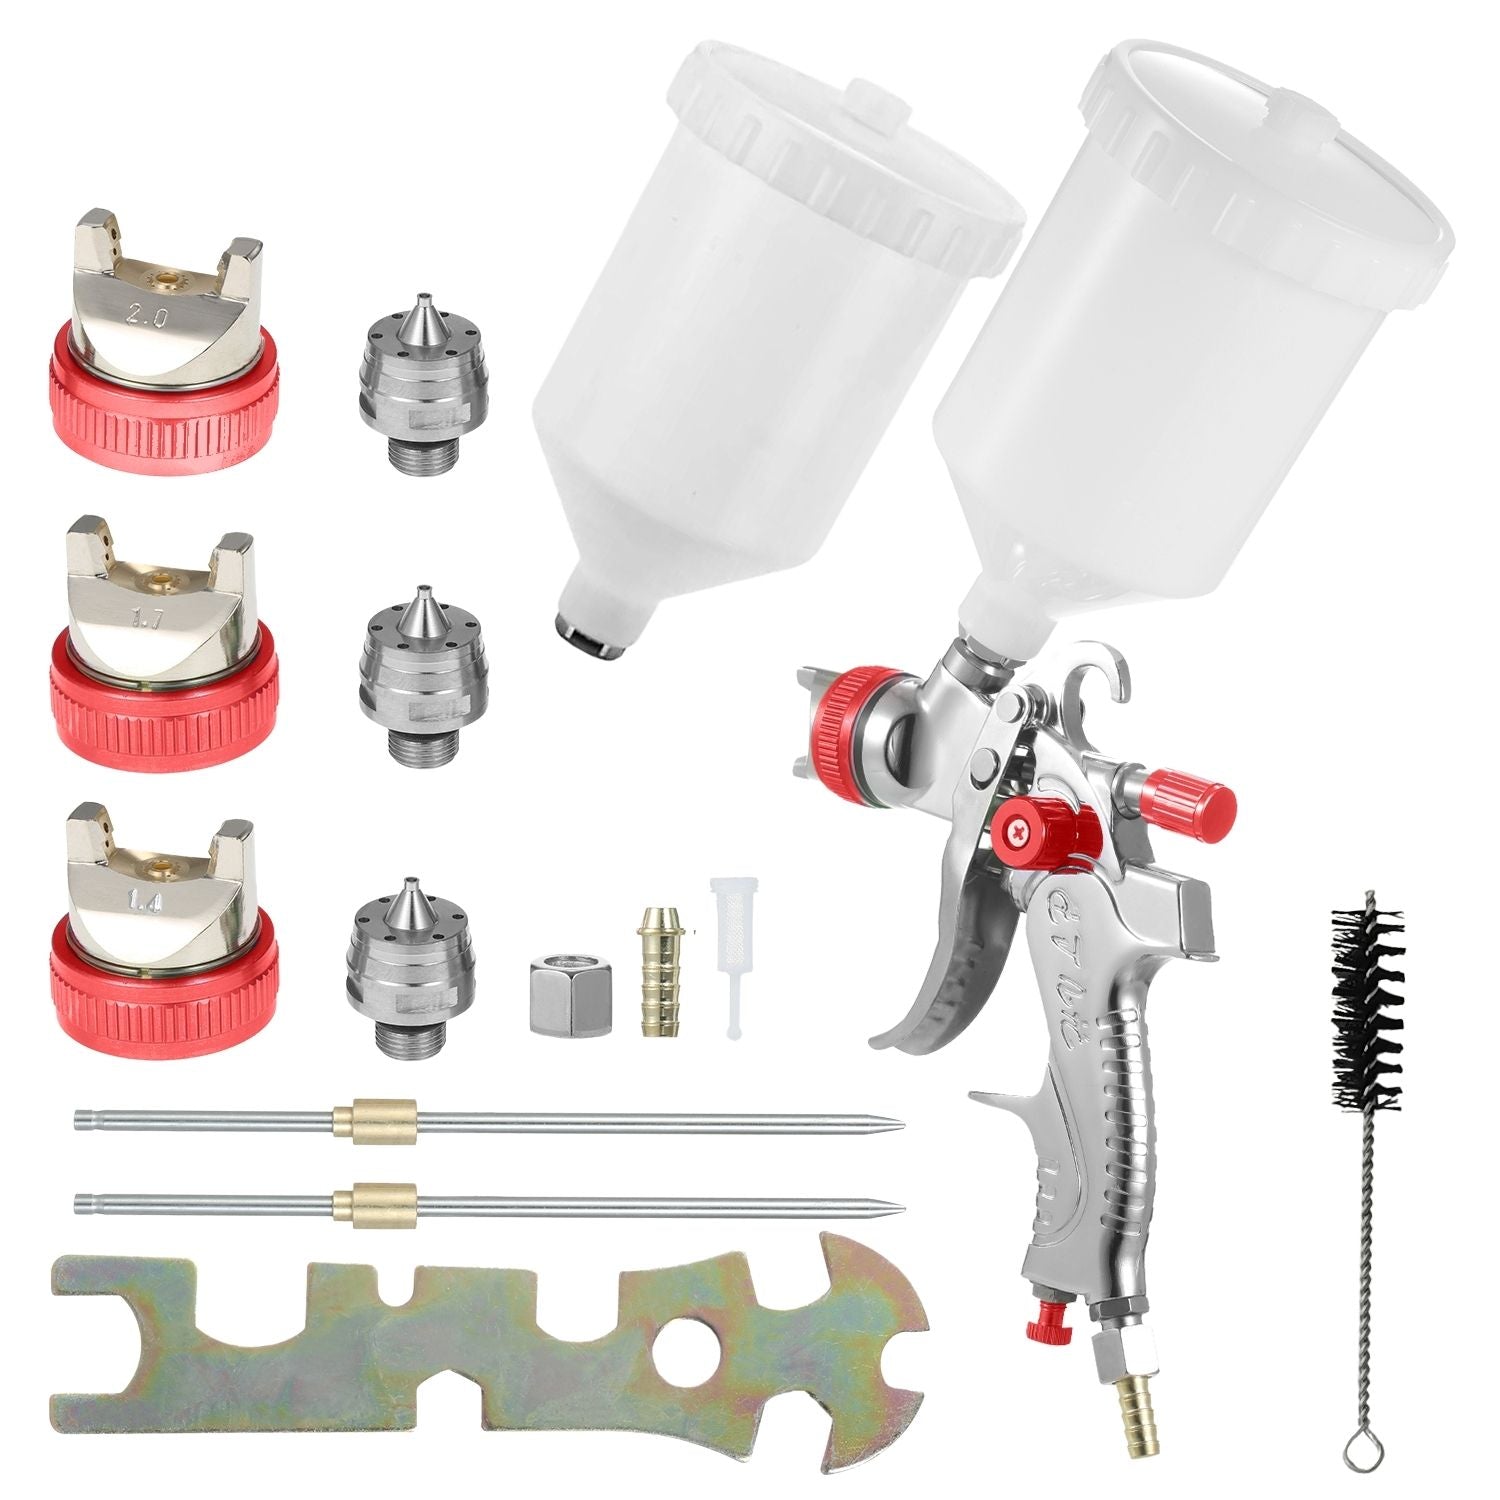 RYNOMATE Gravity Feed Air Spray Paint Gun Kit with 3 Nozzle (Red)